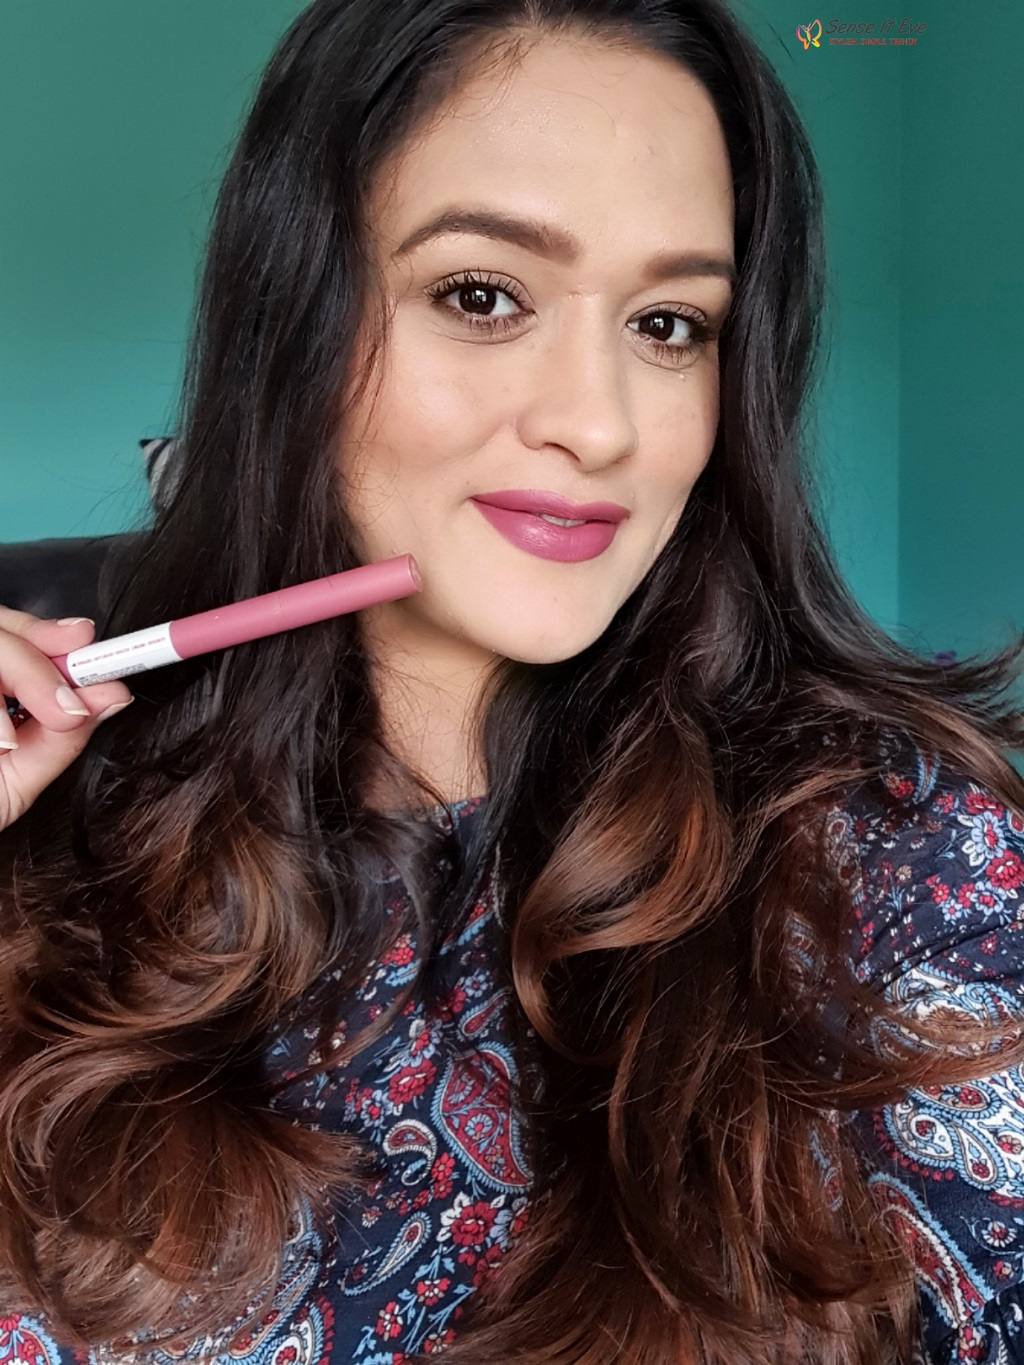 Maybelline Superstay Ink Crayon Stay Exceptional FOTD Sense It Eve Maybelline Superstay Ink Crayon Stay Exceptional & Lead the Way : Review & Swatches